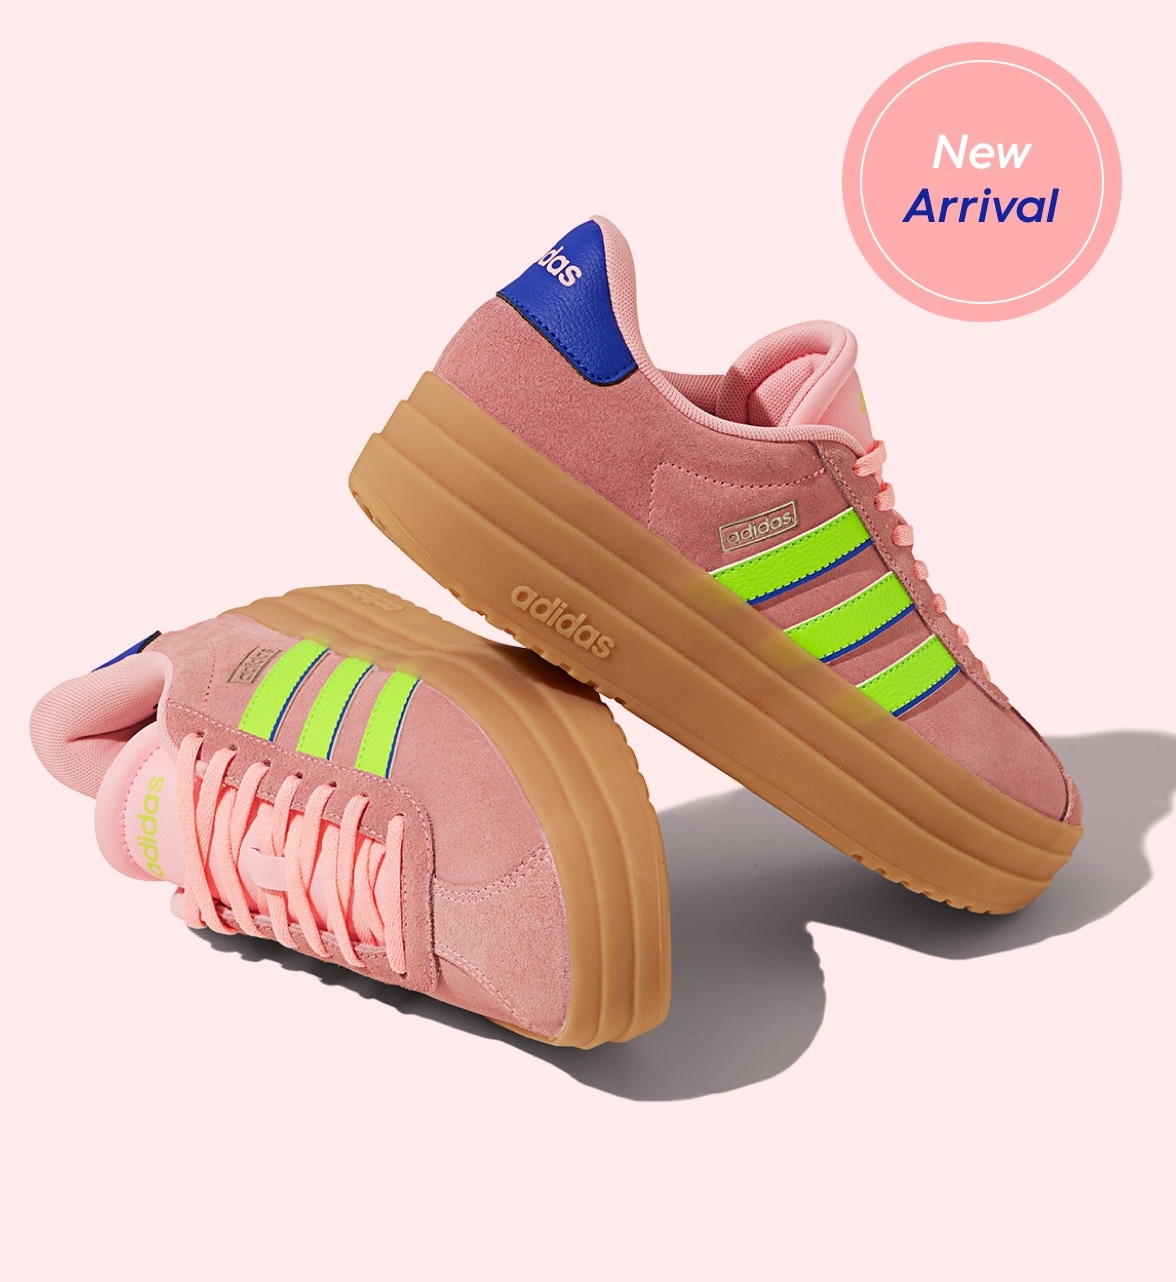 new arrival! W Adidas VL Court Bold Pink/Lemon/Blue 31703 stacked on pink background